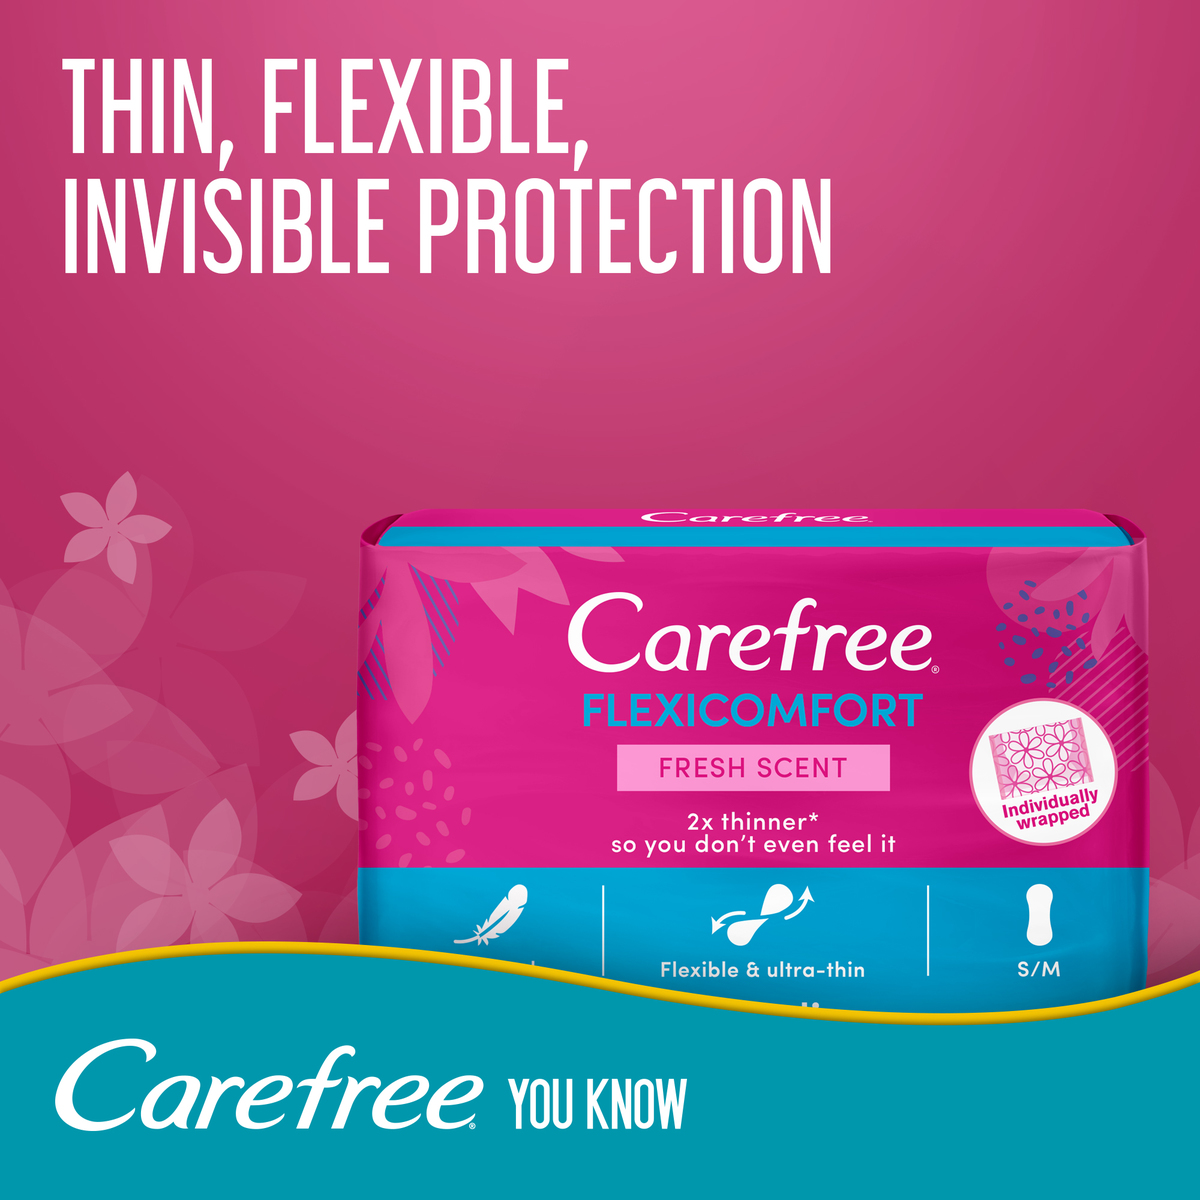 Carefree Panty Liners FlexiComfort Fresh Scent 40pcs